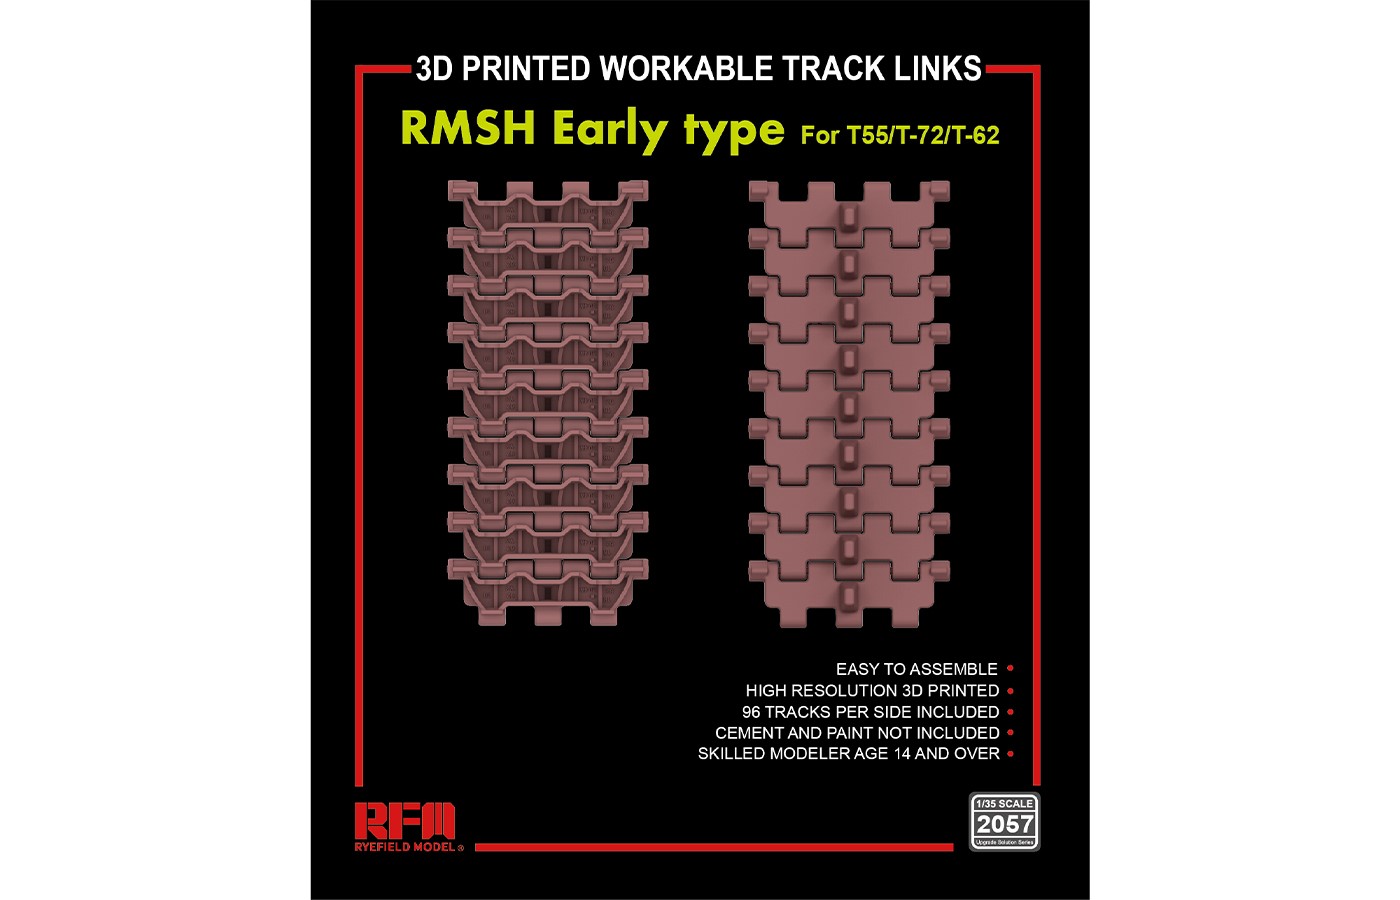 RM-2057  RMSH Early type For T55/-72/T-62 3D PRINTED WORKABLE TRACK LINKS